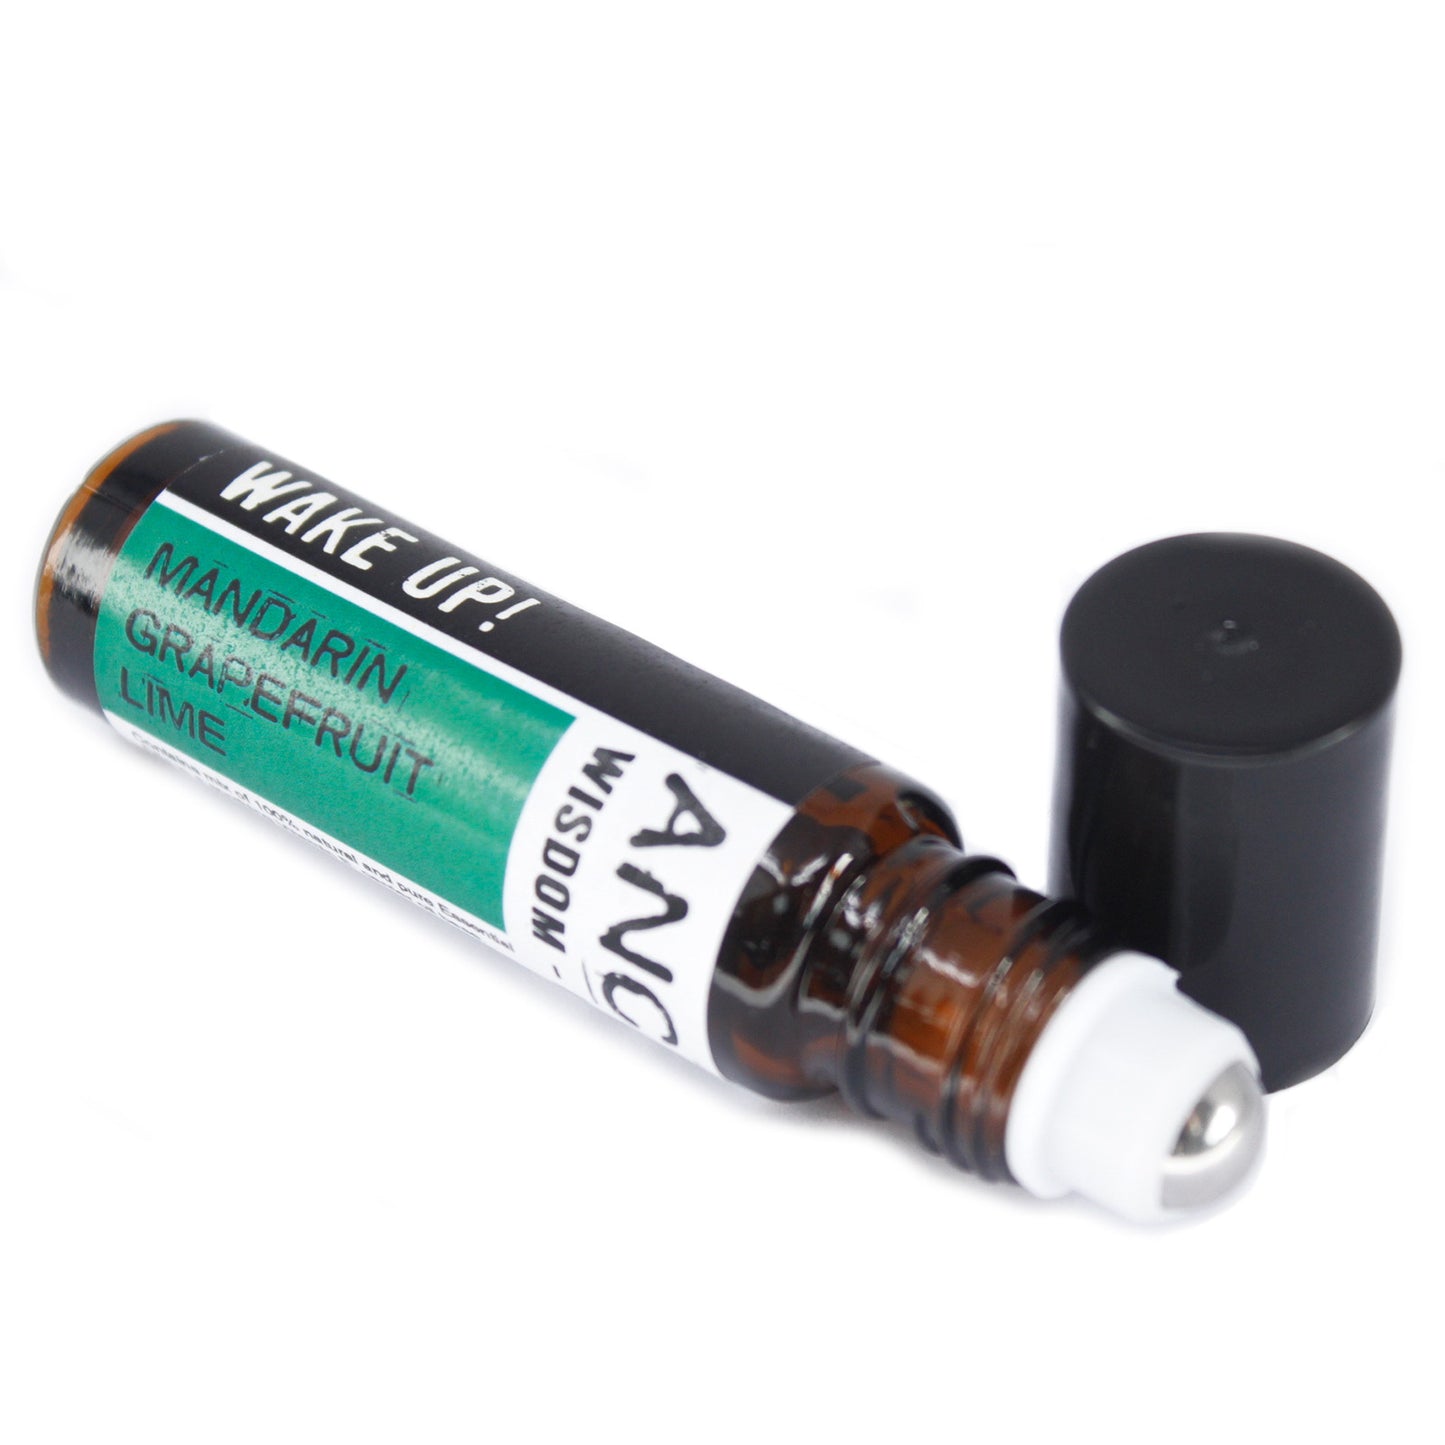 Wake up ! - 10ml Roll On Essential Oil Blend